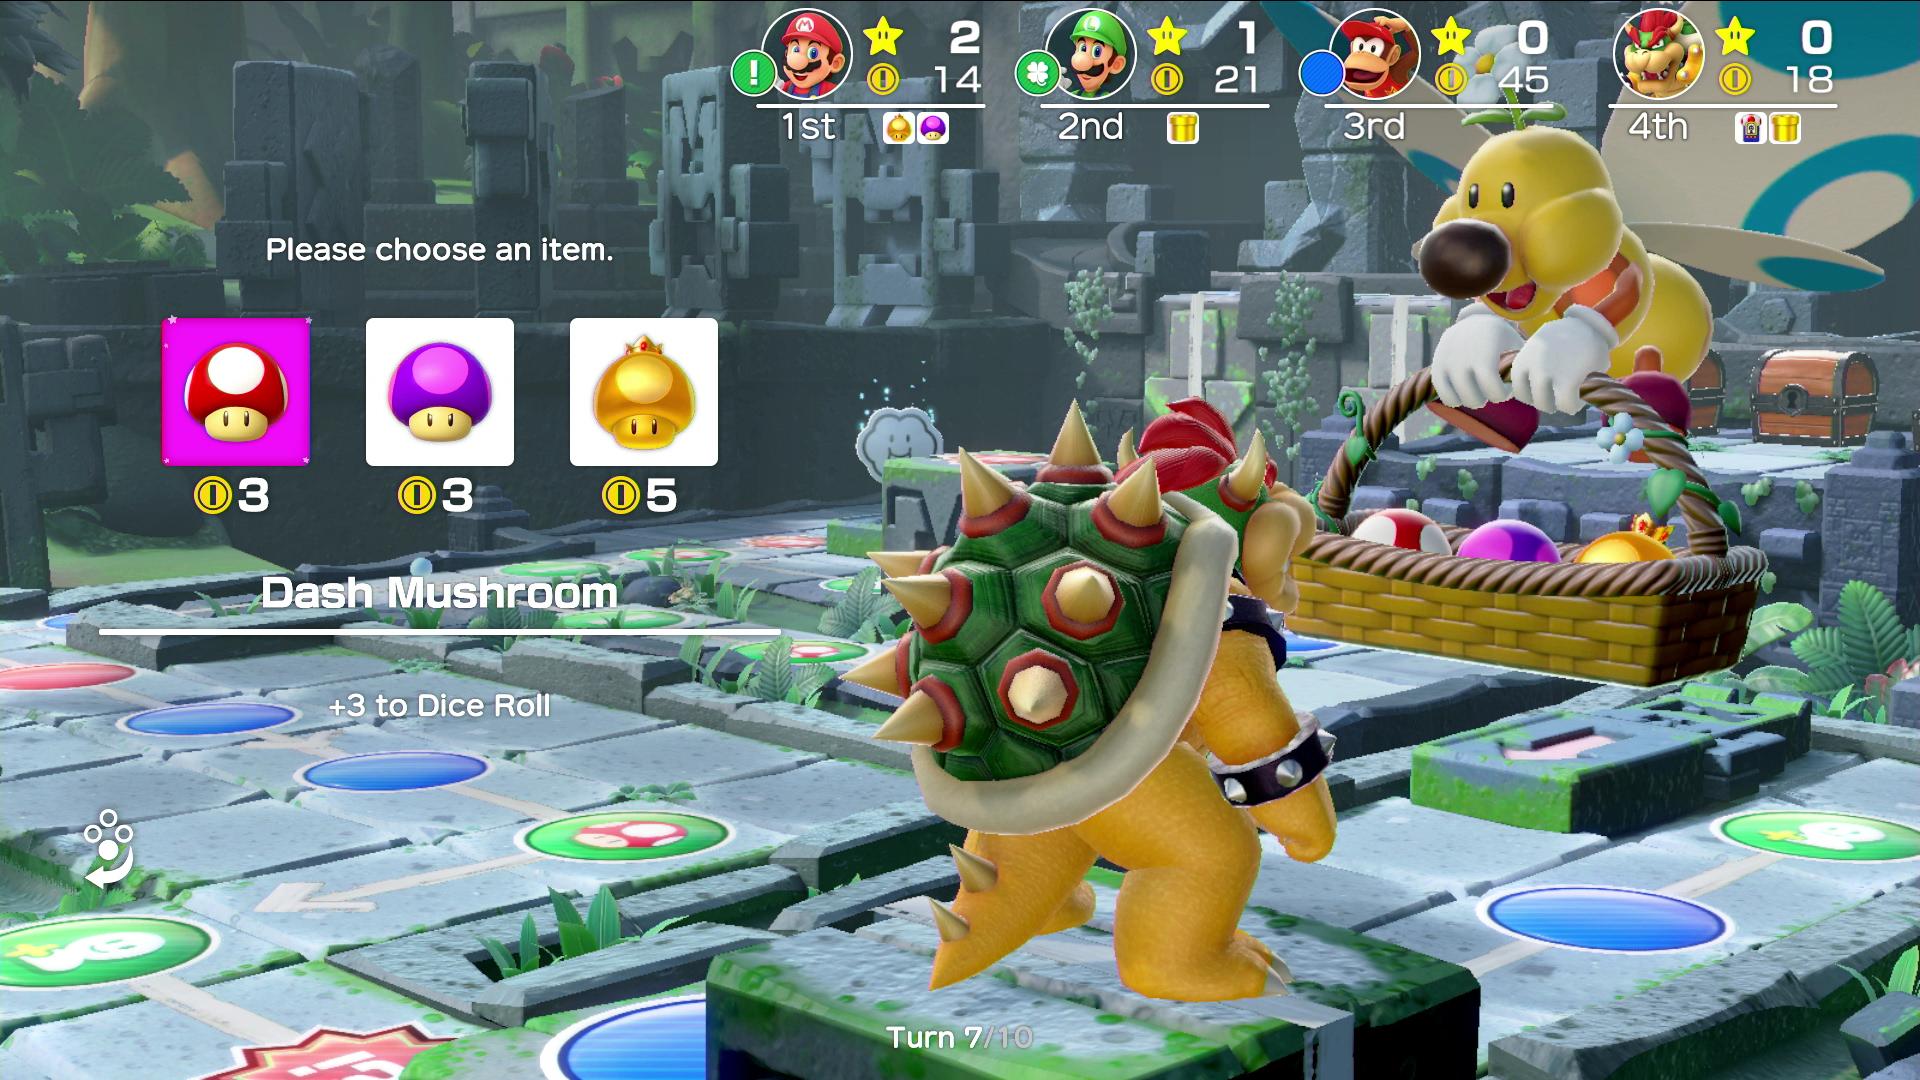 Bowser on the game board for Super Mario Party